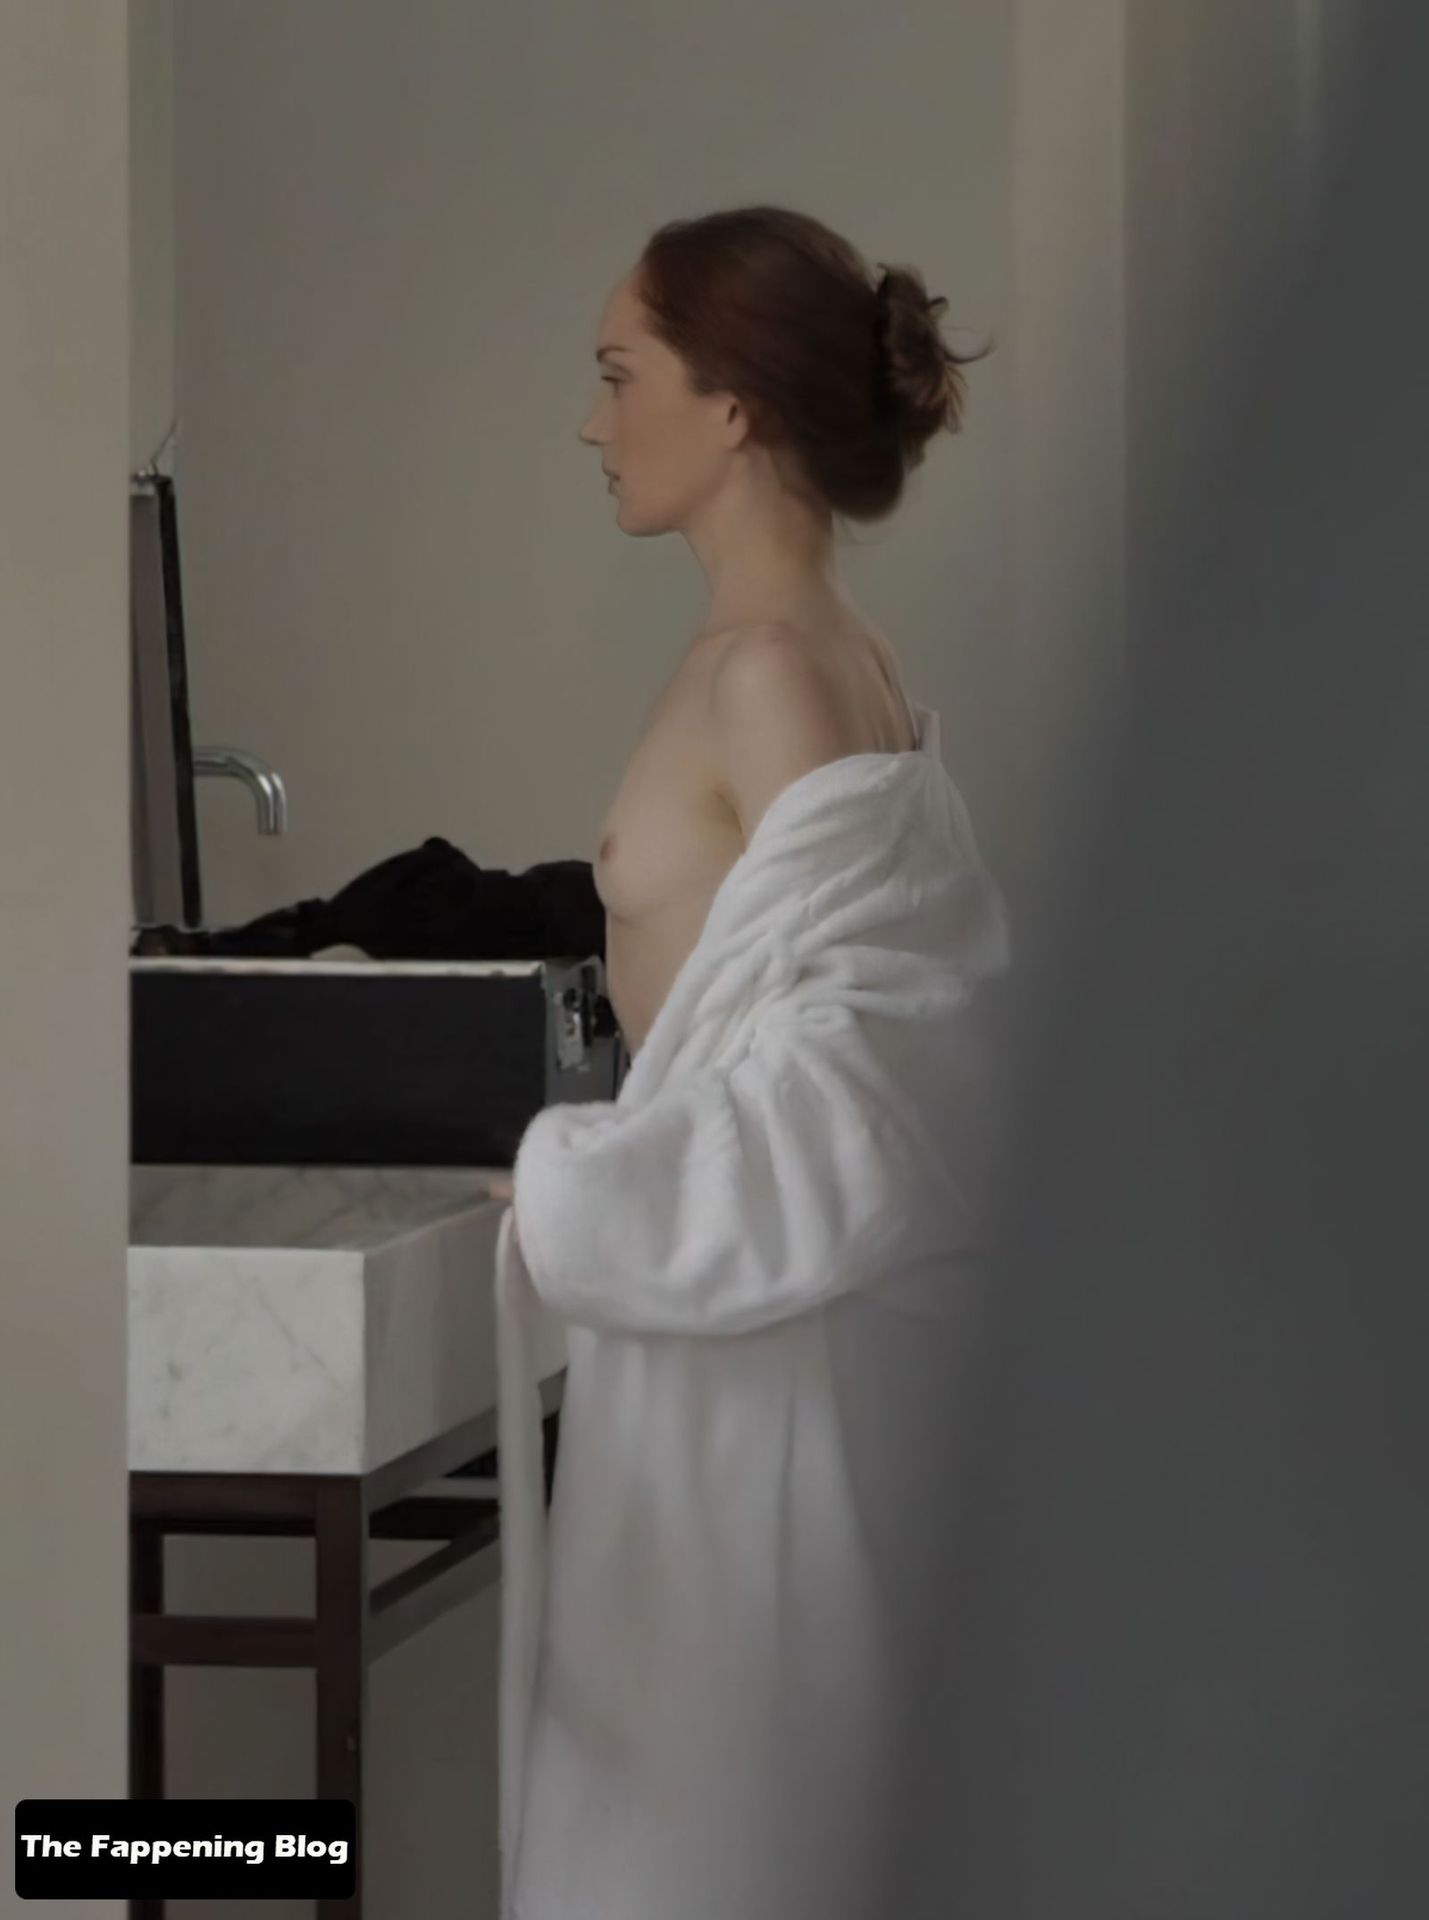 Lotte-Verbeek-Nude-Photo-Collection-The-Fappening-Blog-1.jpg